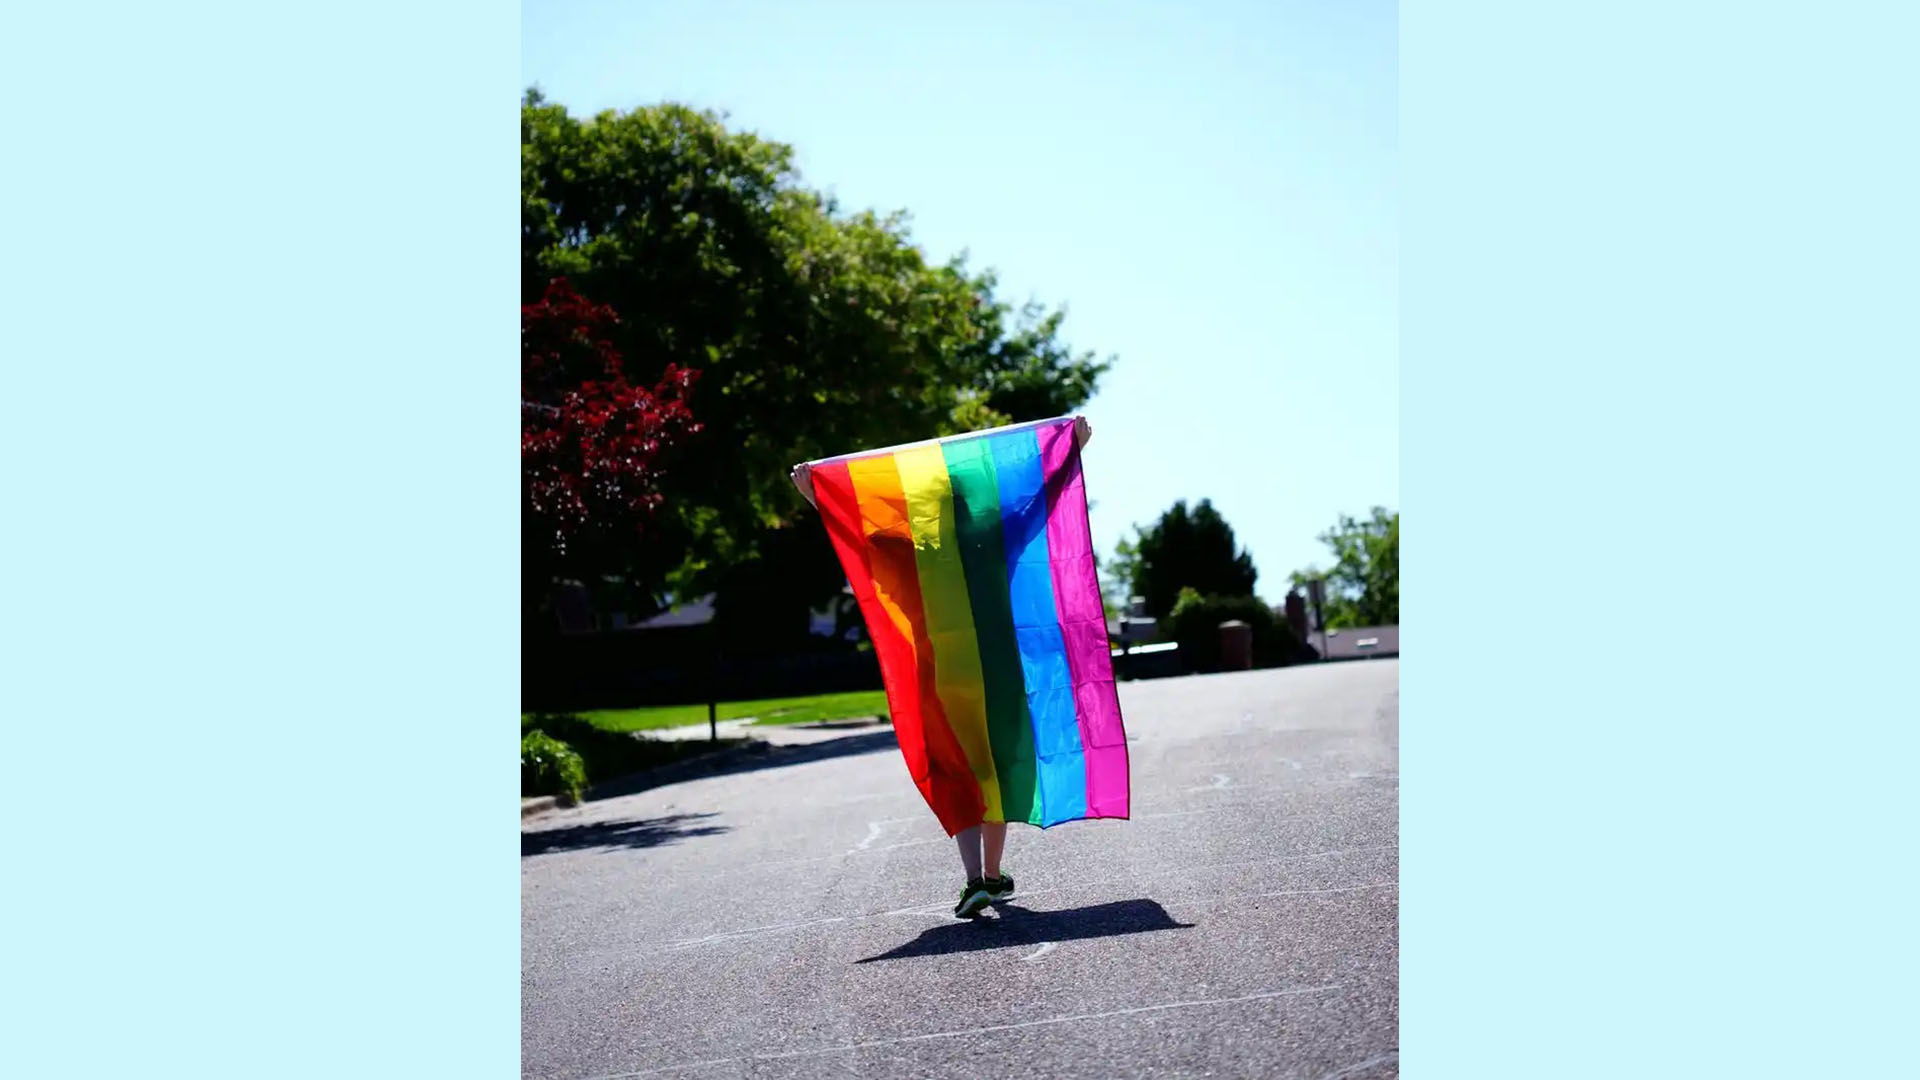 Guest Editorial: We all have the right to be proud, even if you’re gay